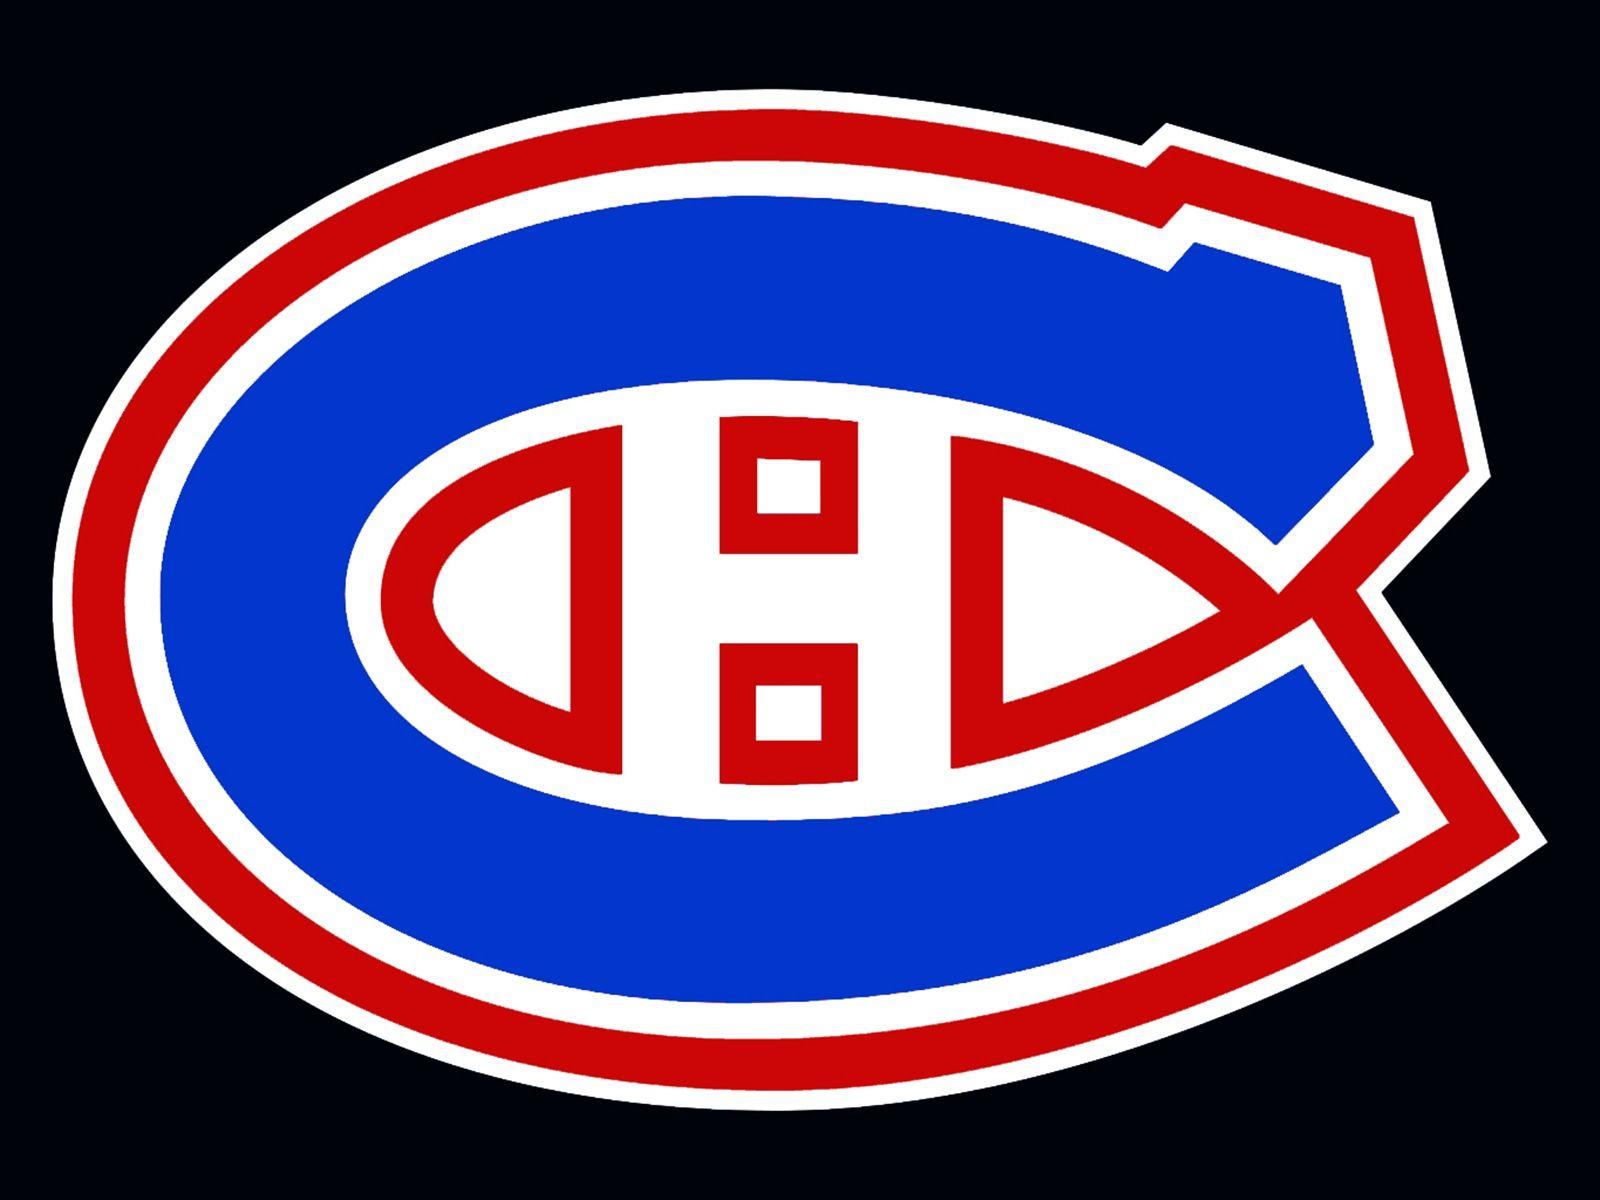 Montreal Canadiens Logo old montreal canadiens logo